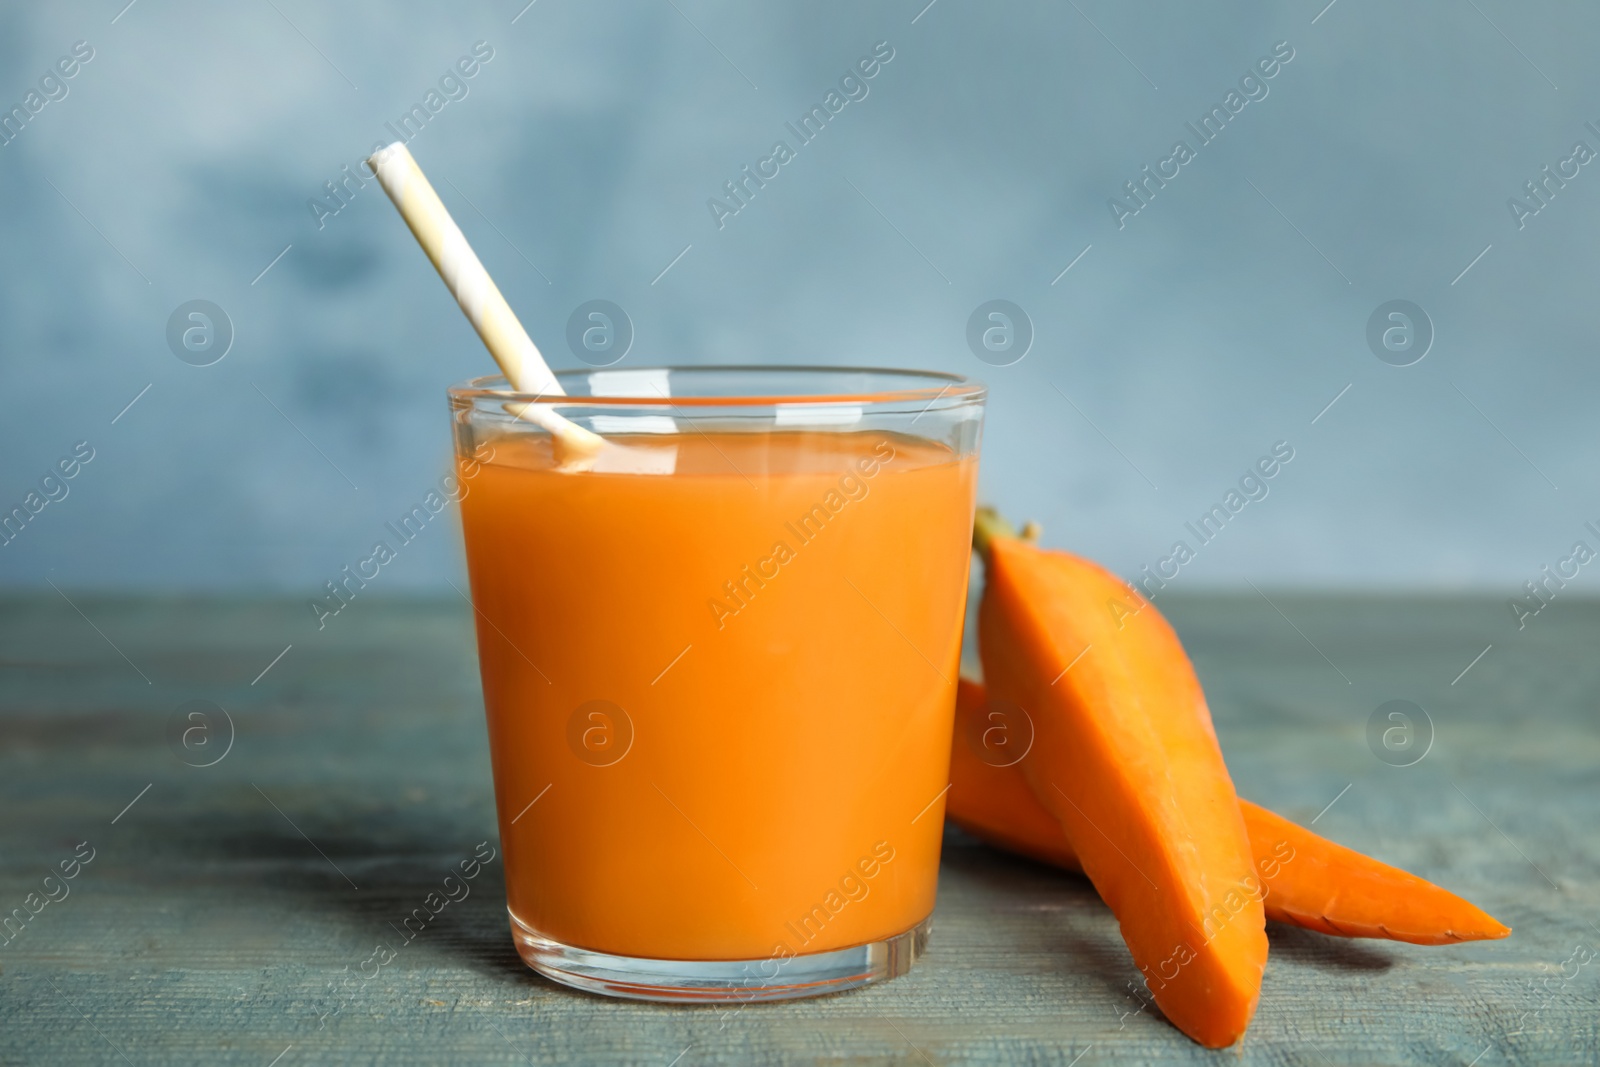 Photo of Freshly made carrot juice in glass on wooden table